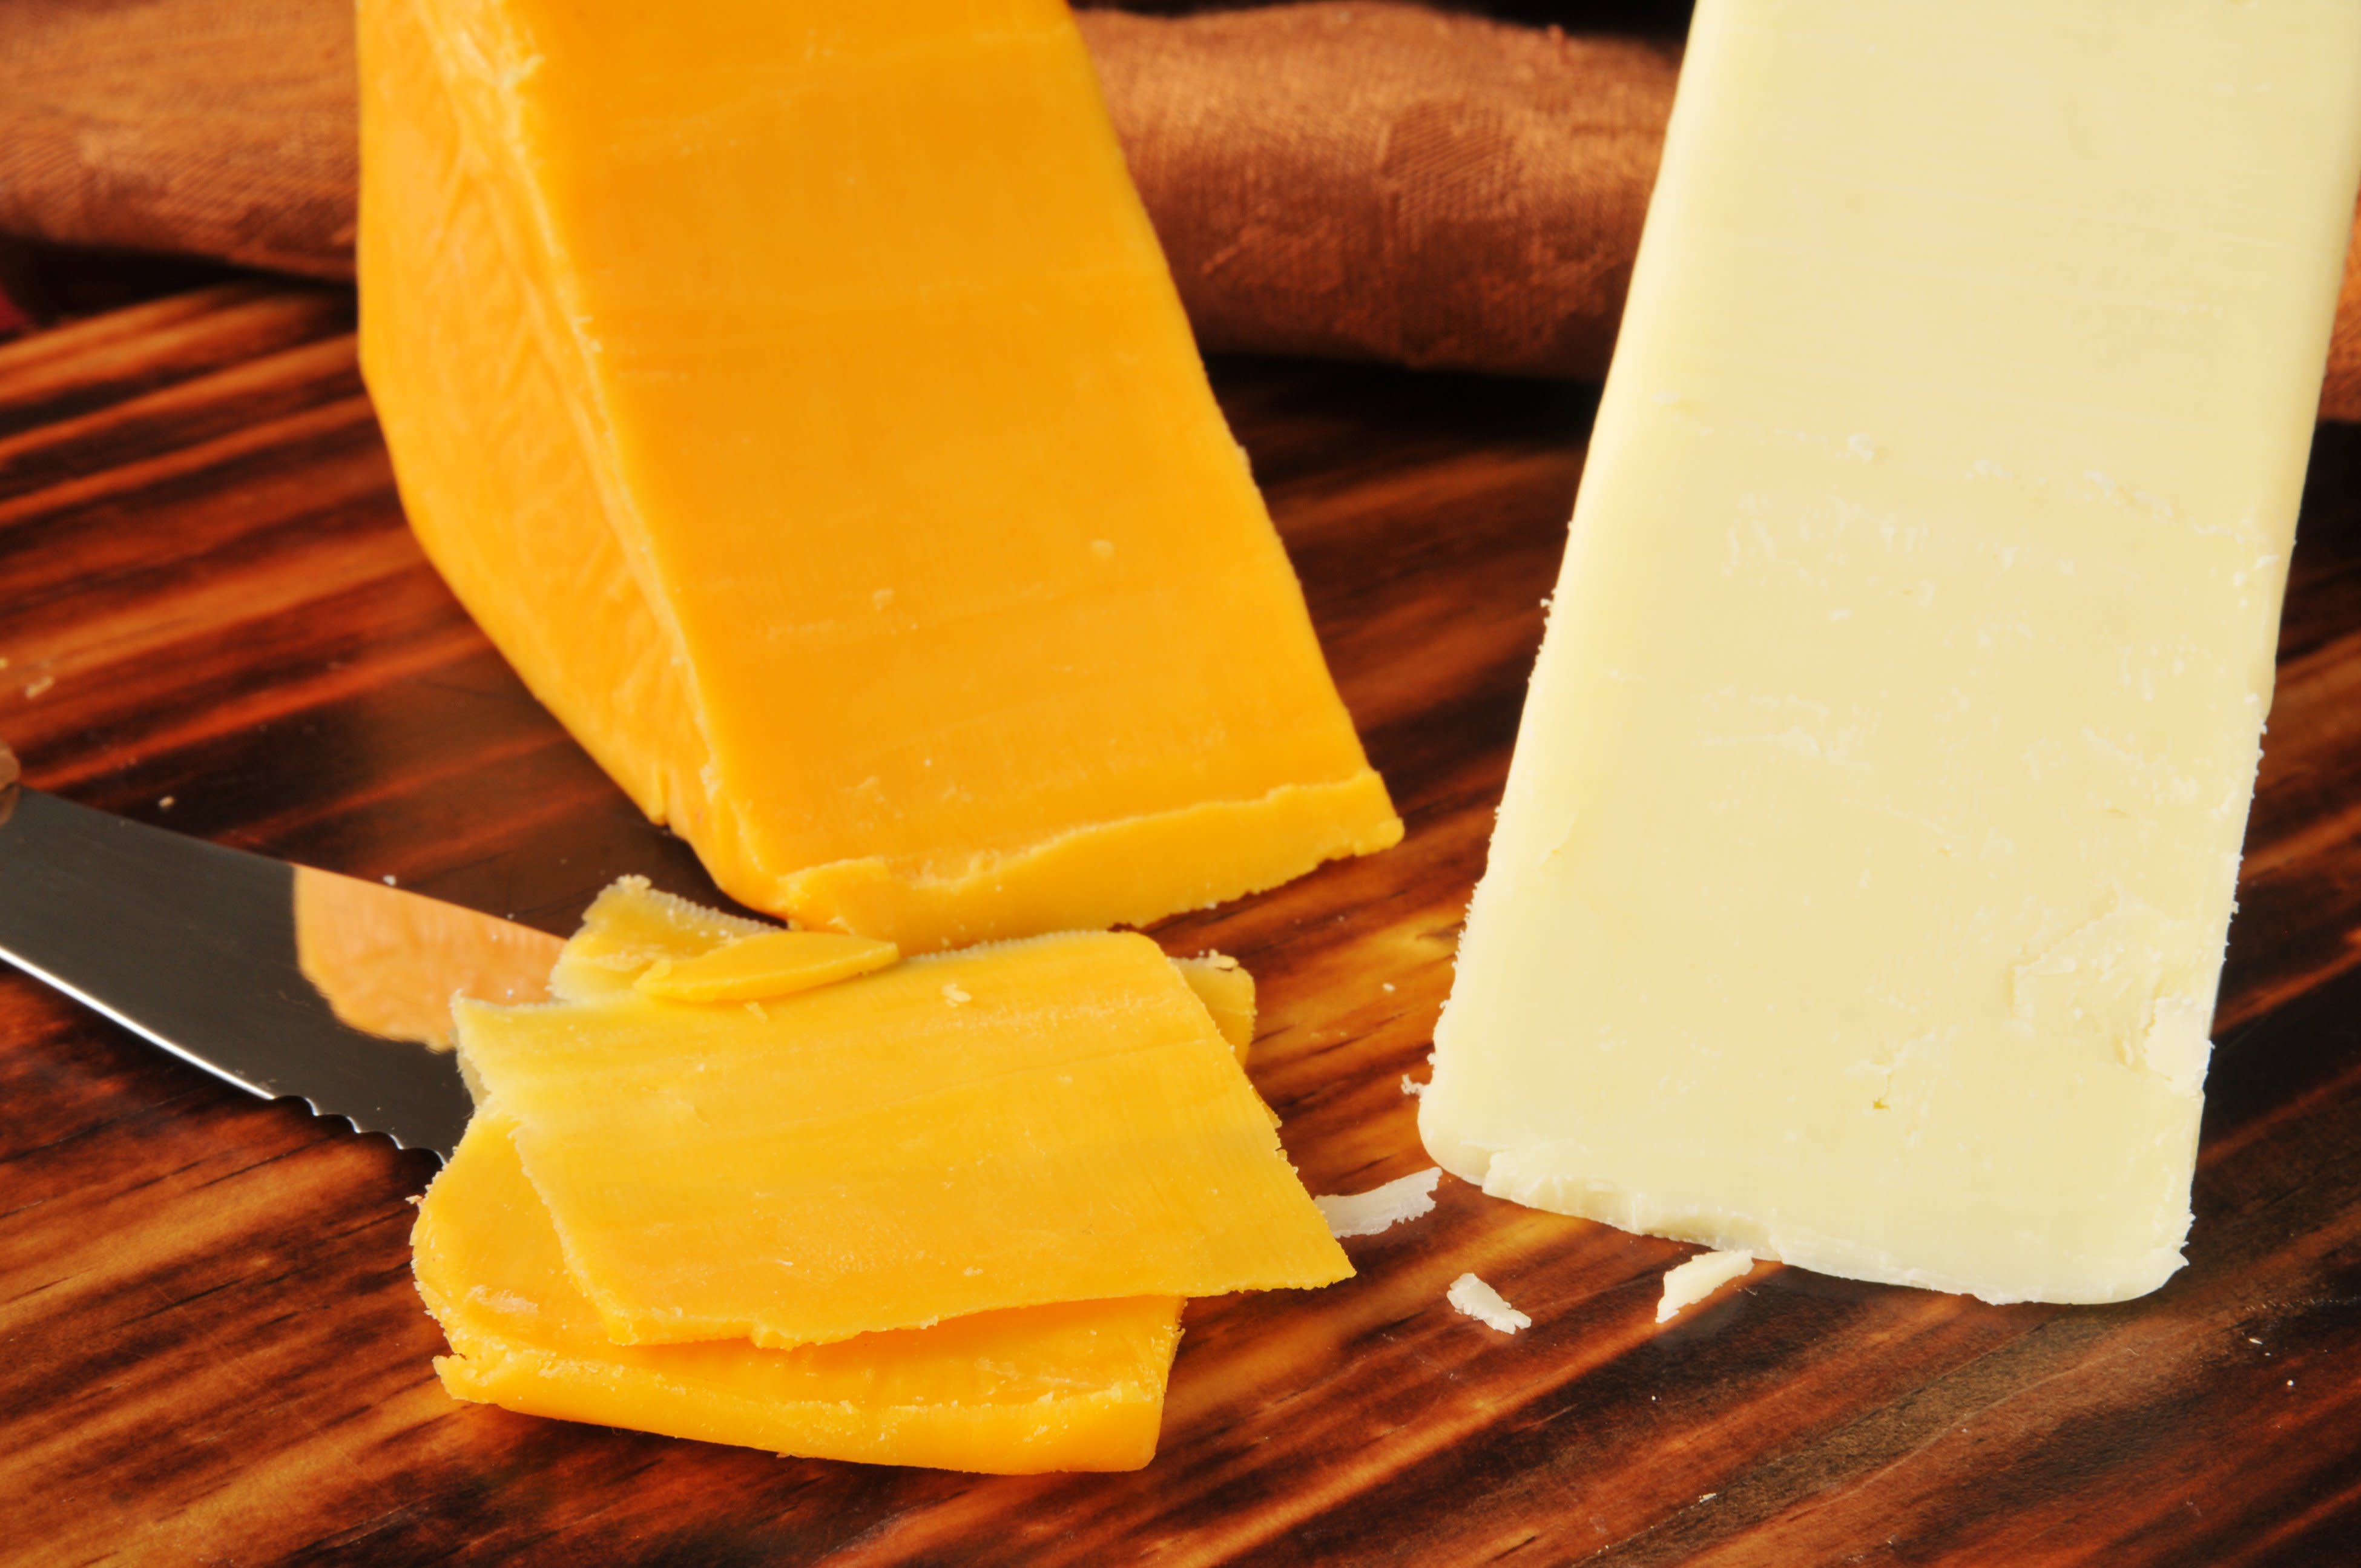 What S The Deal With Sharp Cheddar Cheese Kitchn